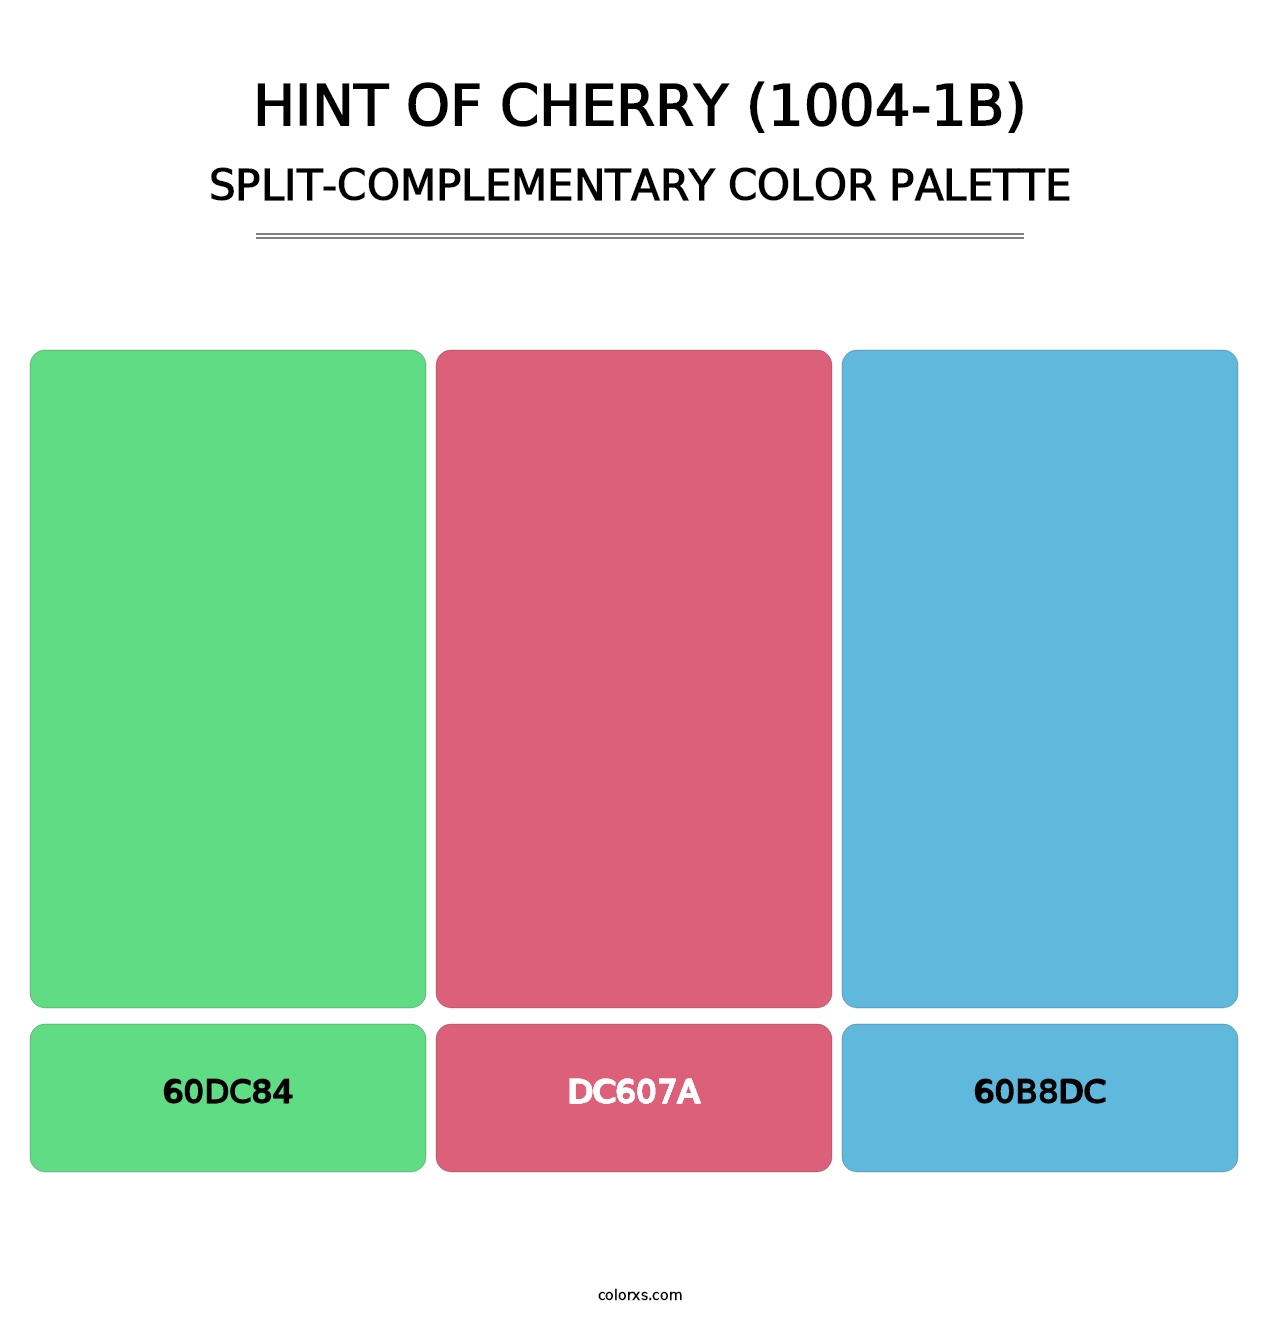 Hint of Cherry (1004-1B) - Split-Complementary Color Palette